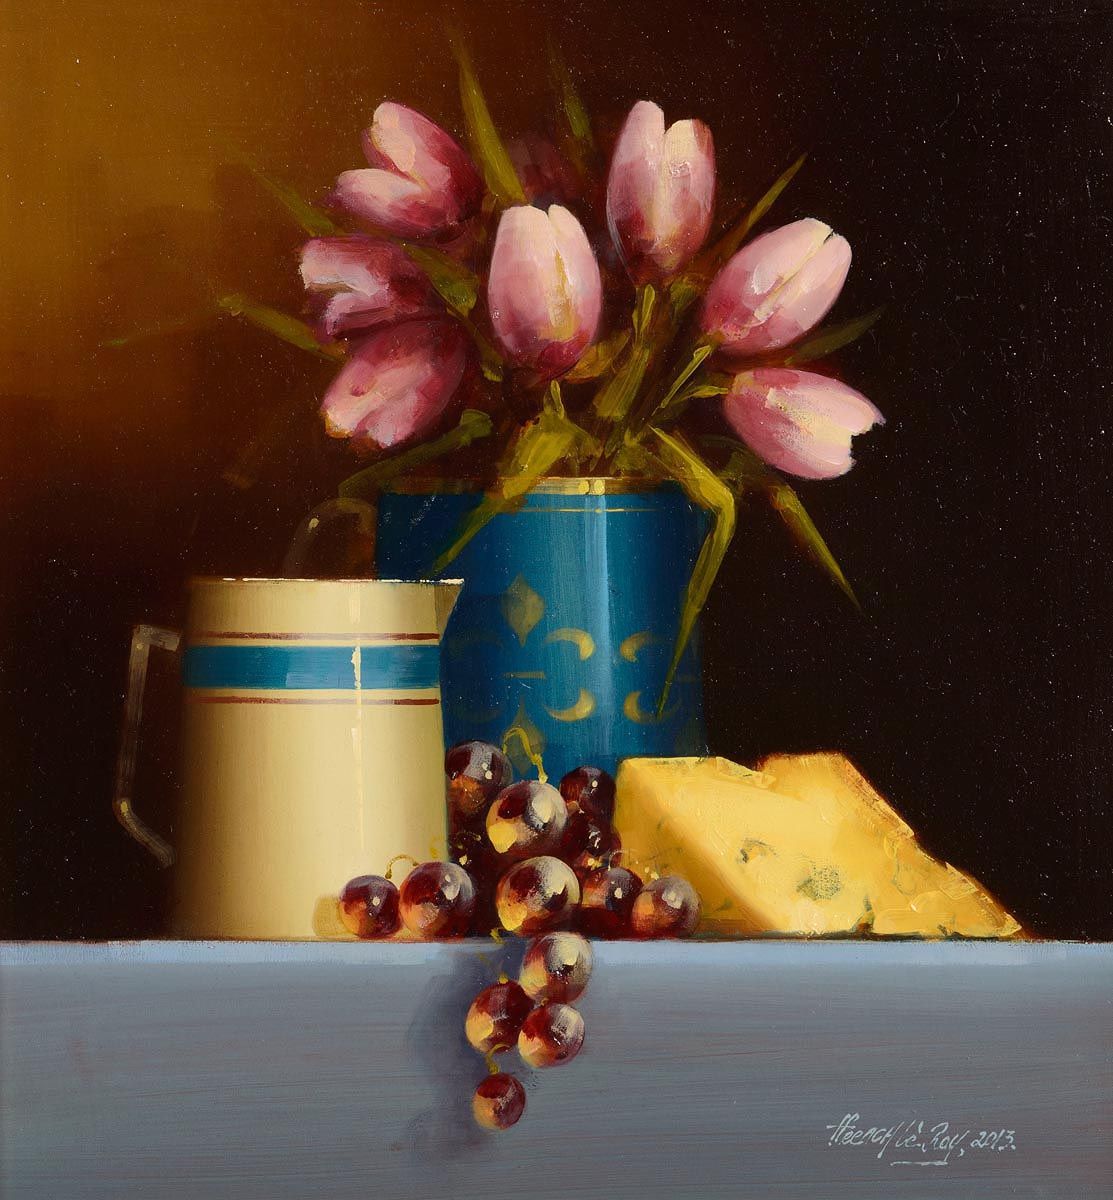 David Ffrench, Still Life With Tulips at Morgan O'Driscoll Art Auctions